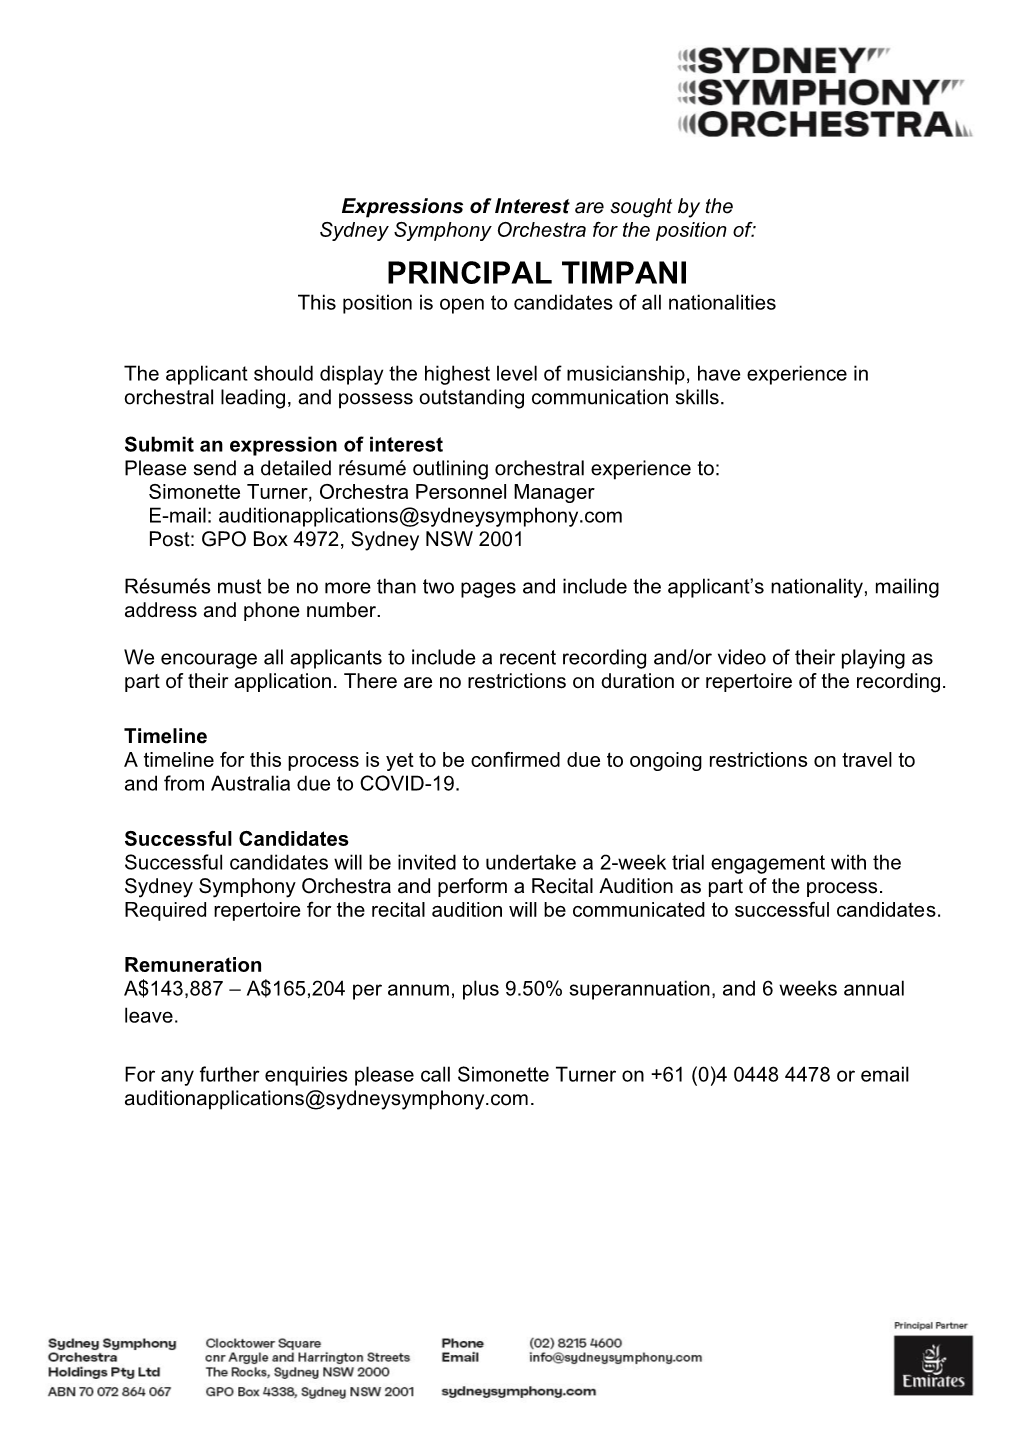 PRINCIPAL TIMPANI This Position Is Open to Candidates of All Nationalities